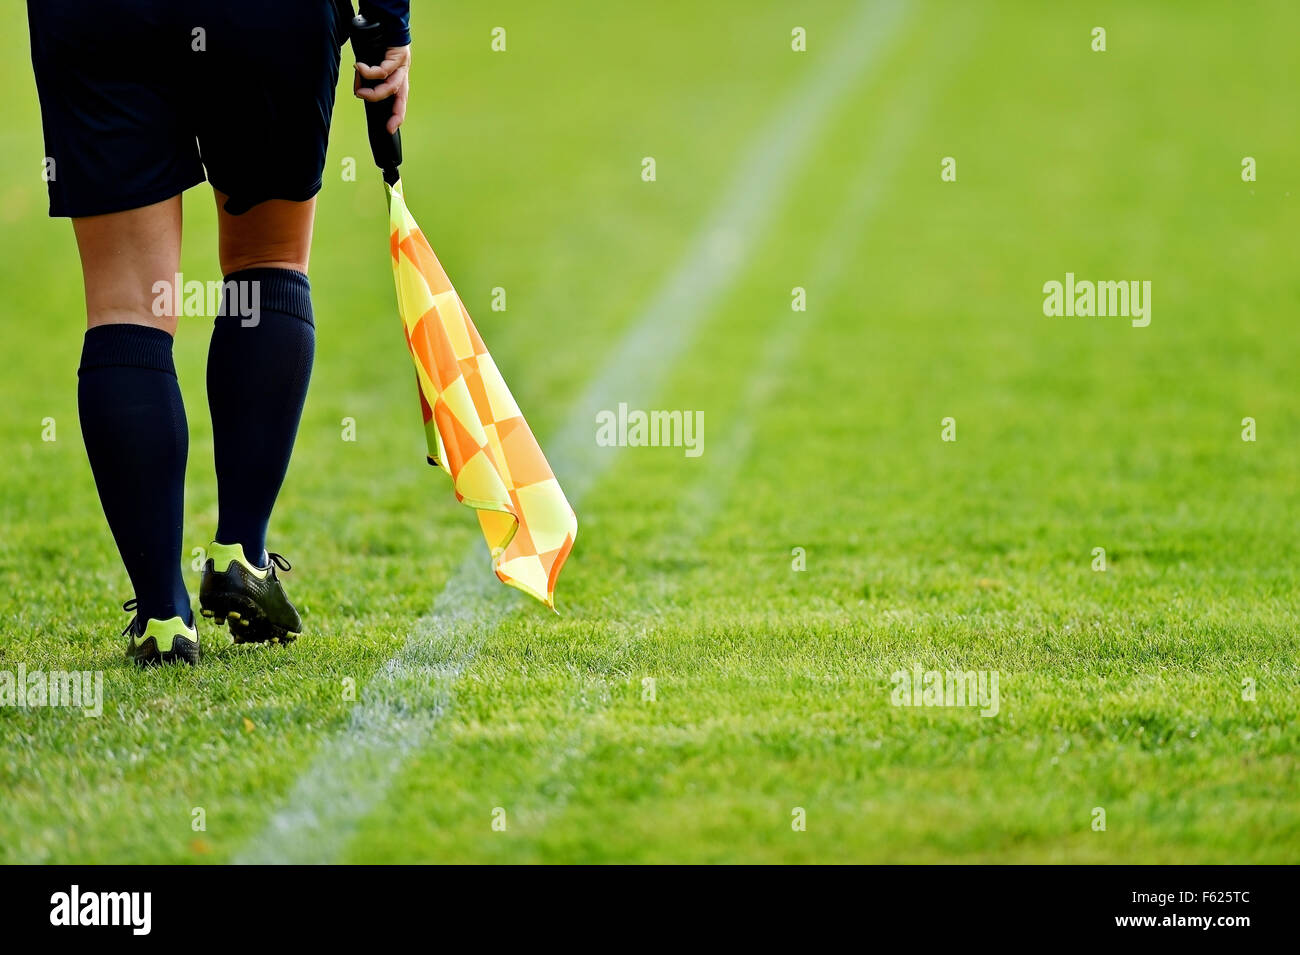 Assistant referee running along the sideline during a soccer match ...